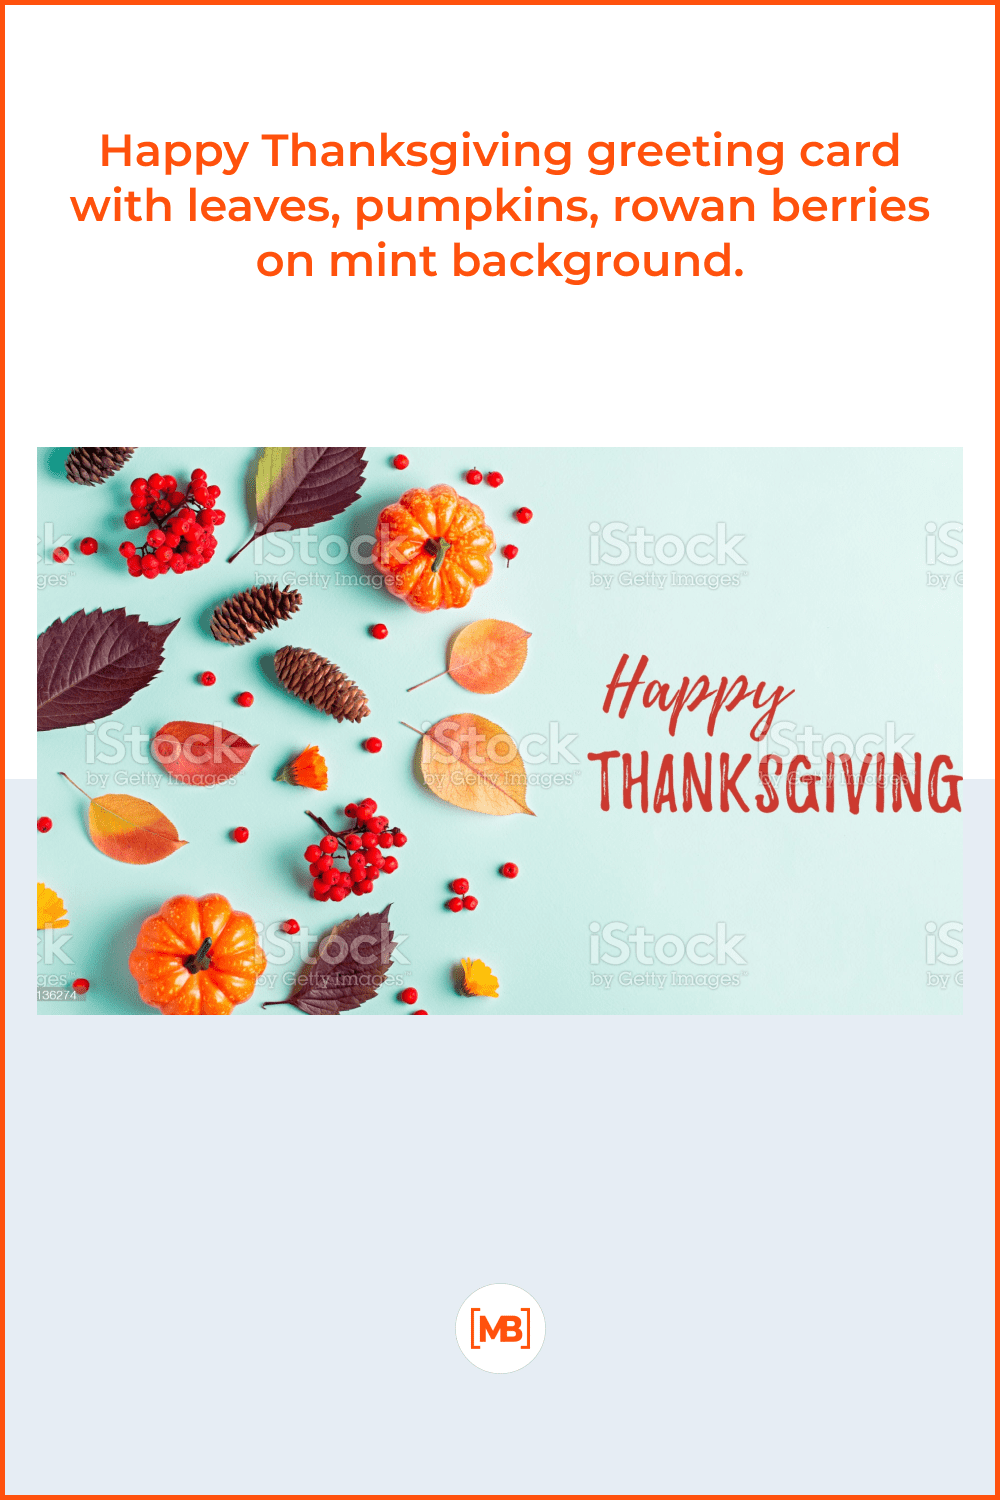 Happy Thanksgiving greeting card with leaves, pumpkins, rowan berries on mint background. Fall, thanksgiving concept. Stock photo.